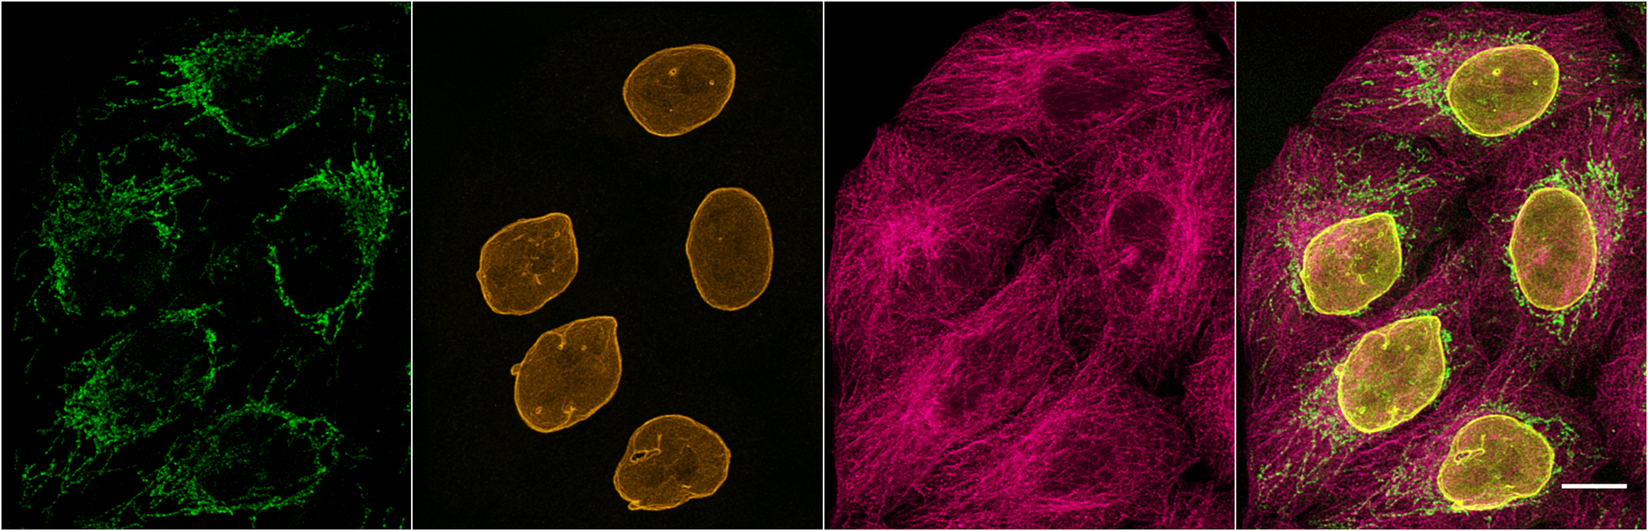 Multiplexed immunostaining of HeLa cells with two alpaca anti-mouse Nano-Secondaries and one anti-rabbit Nano-Secondary. Green: mouse IgG1 anti-COX4 + Nano-Secondary alpaca anti-mouse IgG1 Alexa Fluor® 488. Yellow: rabbit anti-Lamin + Nano-Secondary alpaca anti-rabbit IgG Alexa Fluor® 568. Magenta: mouse IgG2b anti-Tubulin + Nano-Secondary alpaca anti-mouse IgG2b Alexa Fluor® 647. Scale bar, 10 µm. Images were recorded at the Core Facility Bioimaging at the Biomedical Center, LMU Munich.